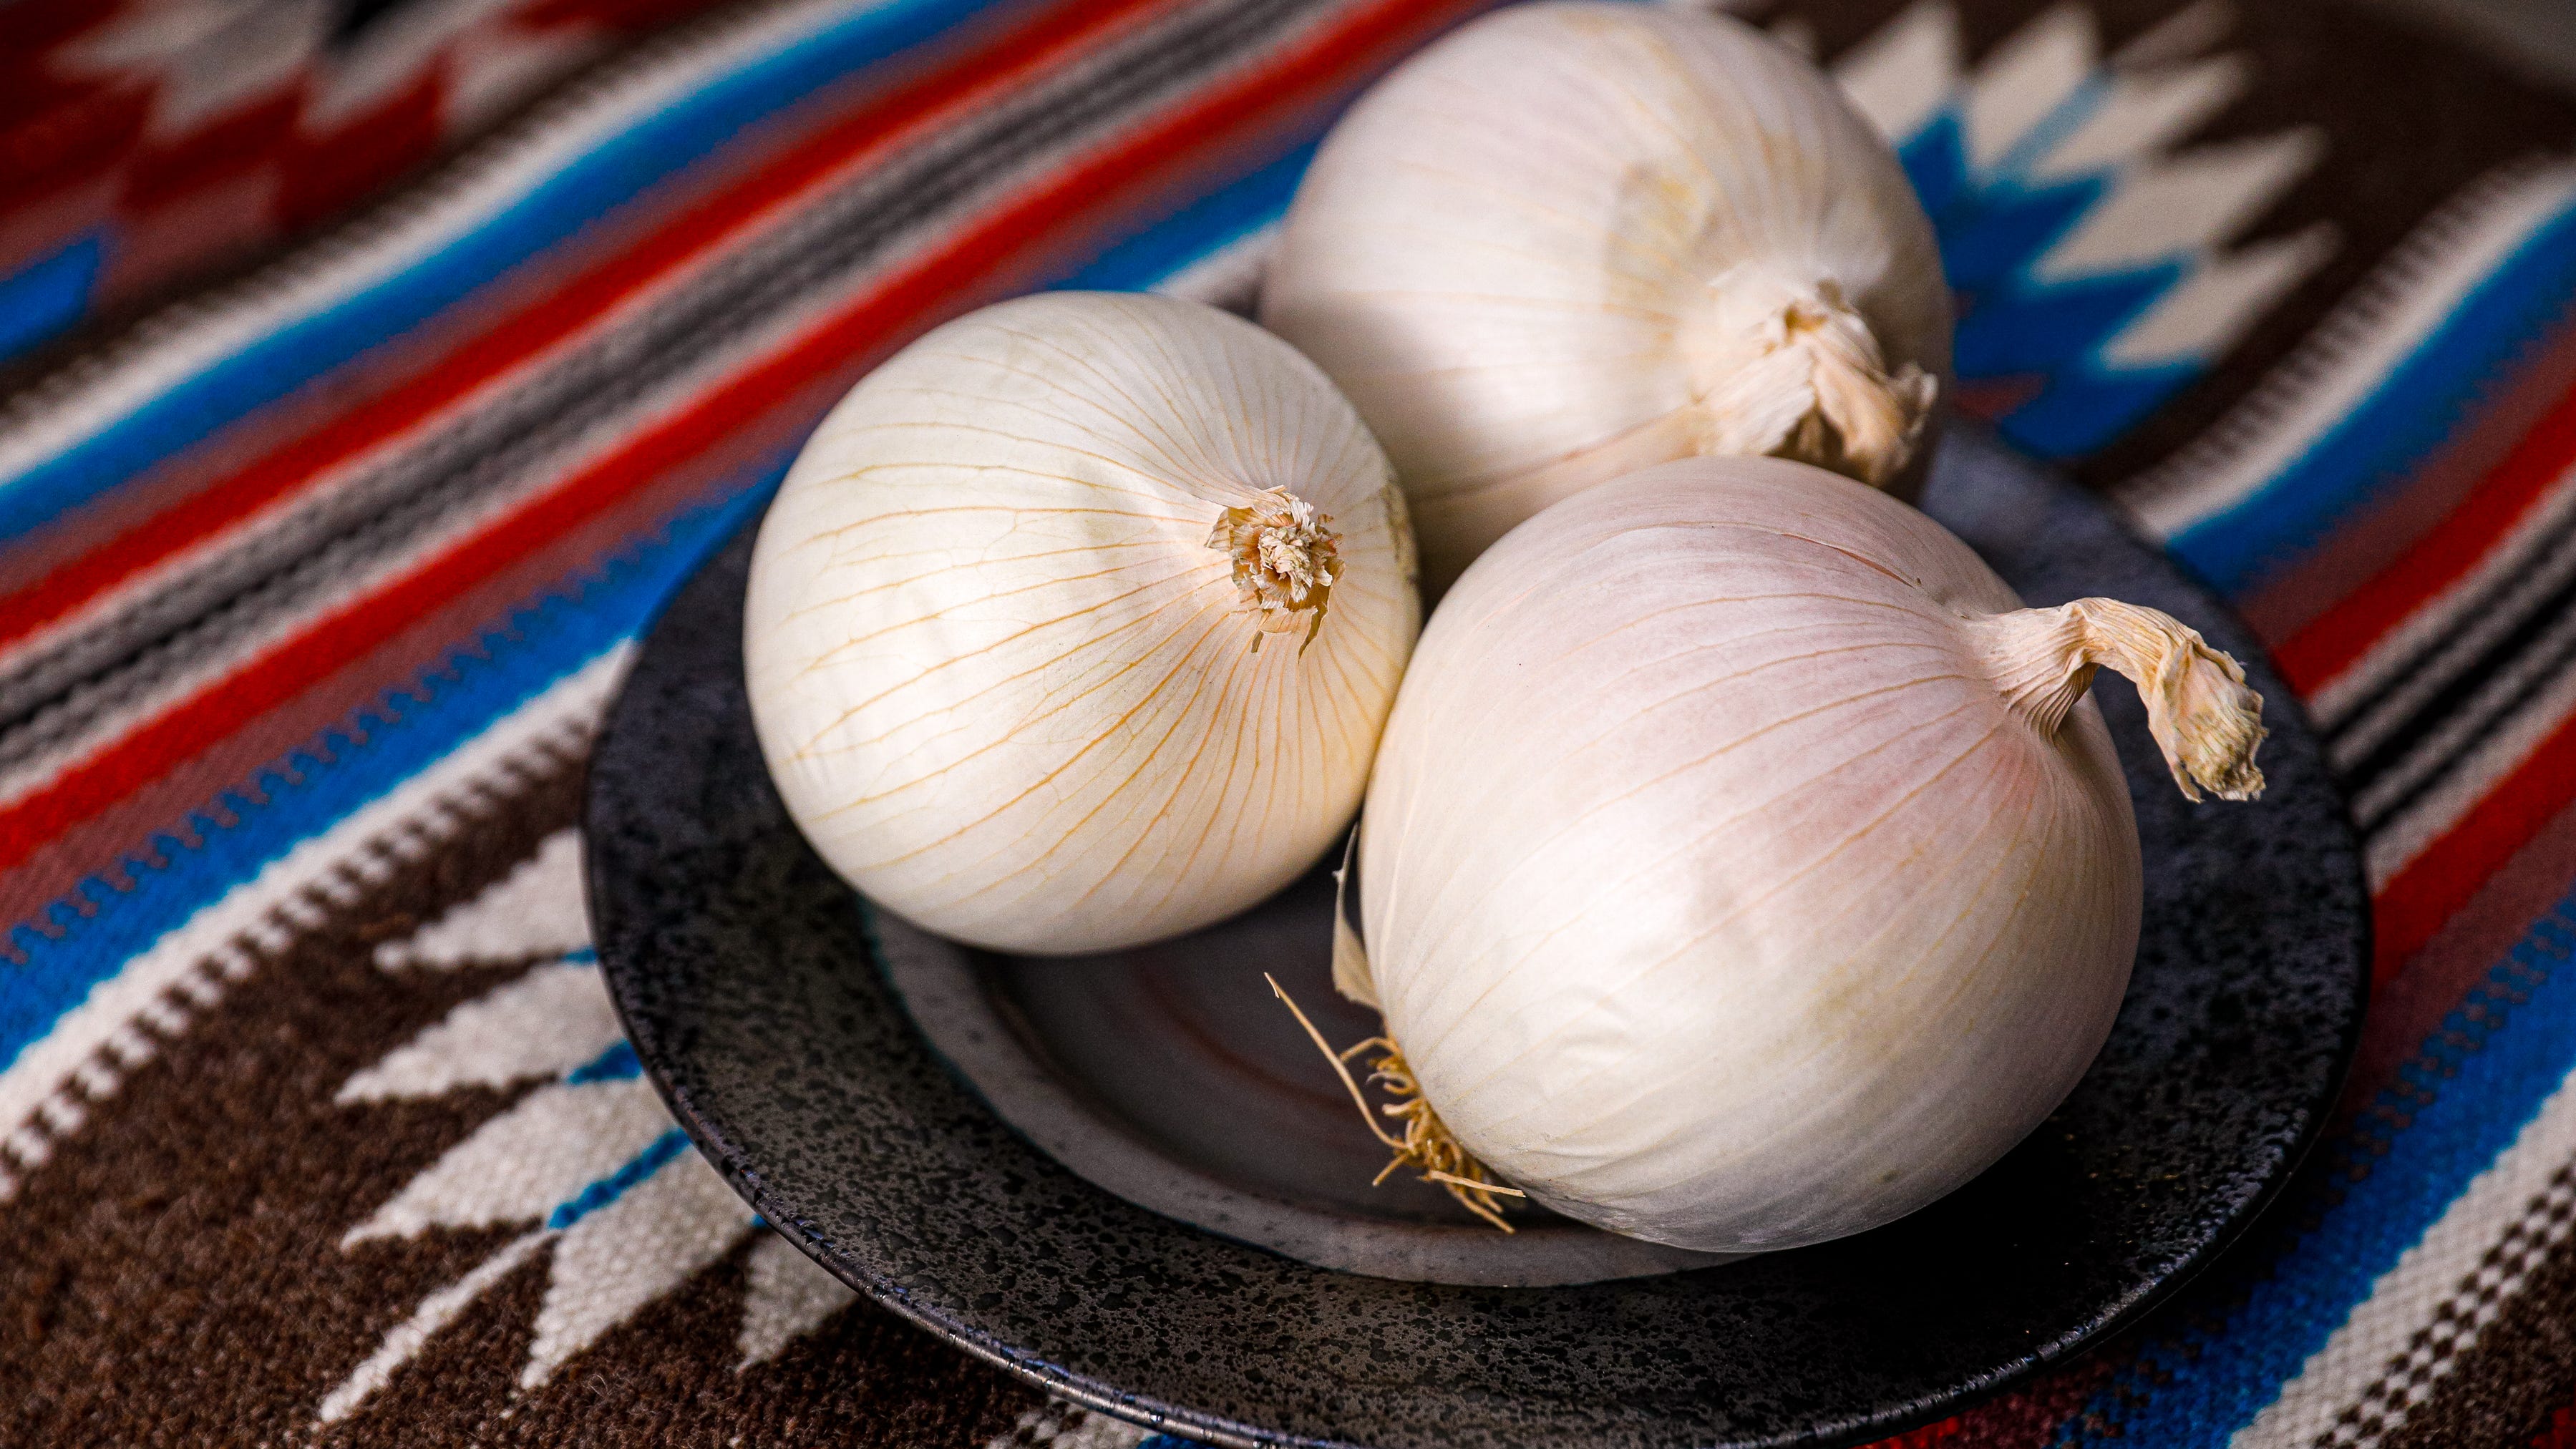 The CDC is warning consumers that onions from the state of Chihuahua in Northern&nbsp;Mexico should be discarded. The announcement comes as a salmonella outbreak that was first reported in mid-September by the agency has grown to sicken more than 600 people in 37 states as of Oct. 21.